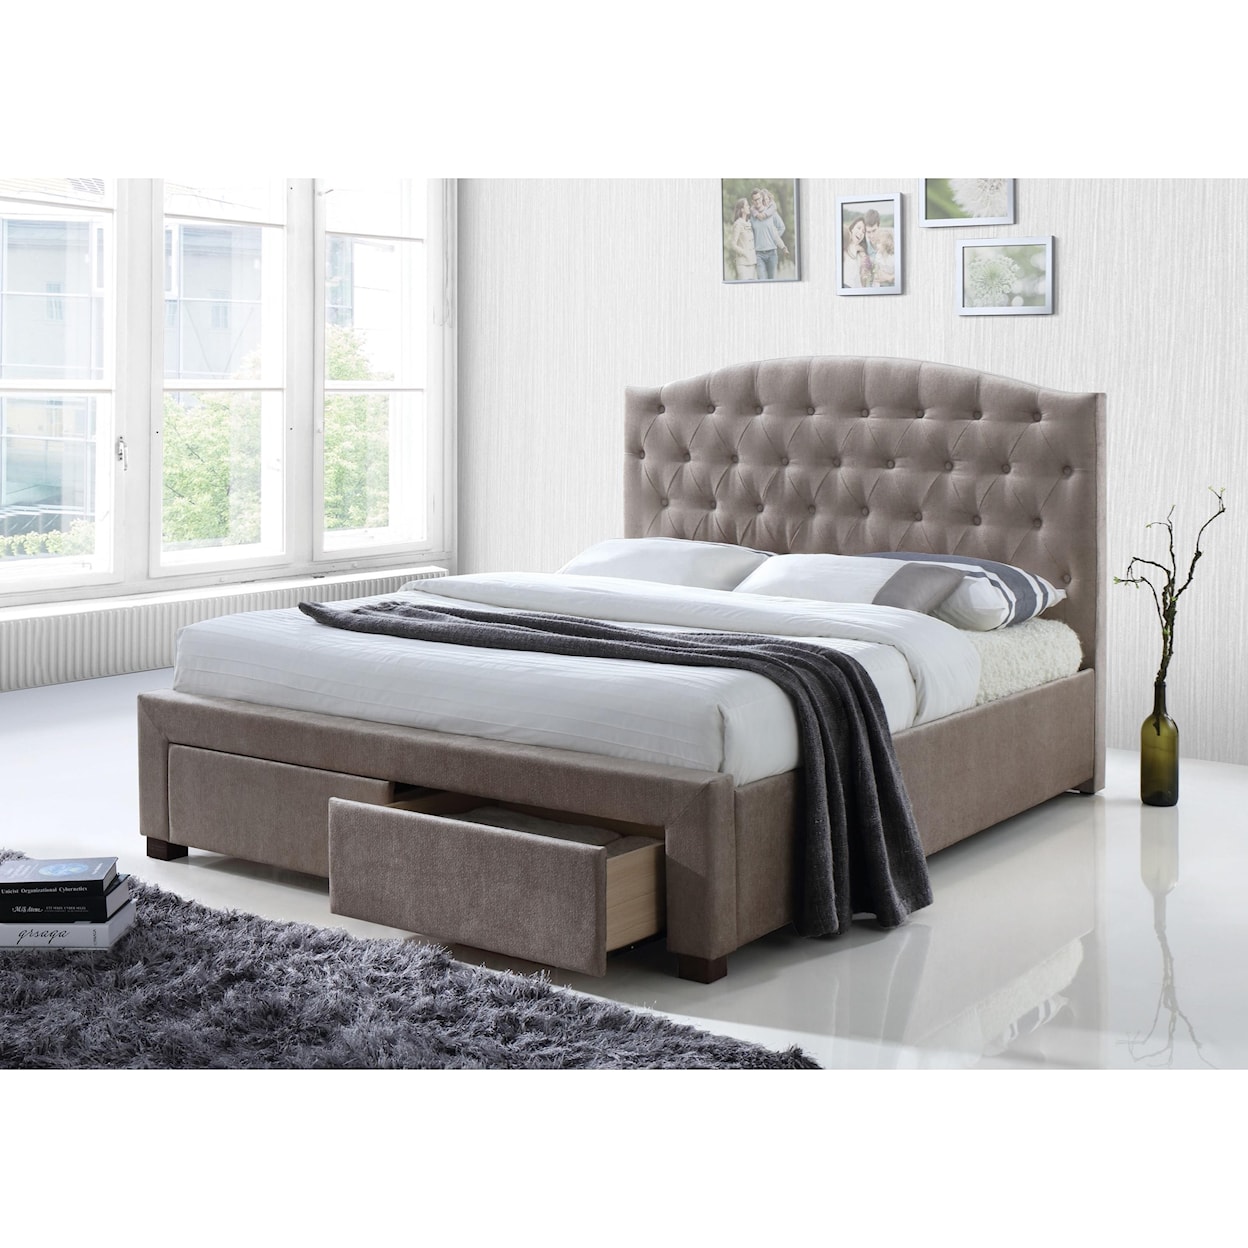 Acme Furniture Denise Queen Bed w/Storage